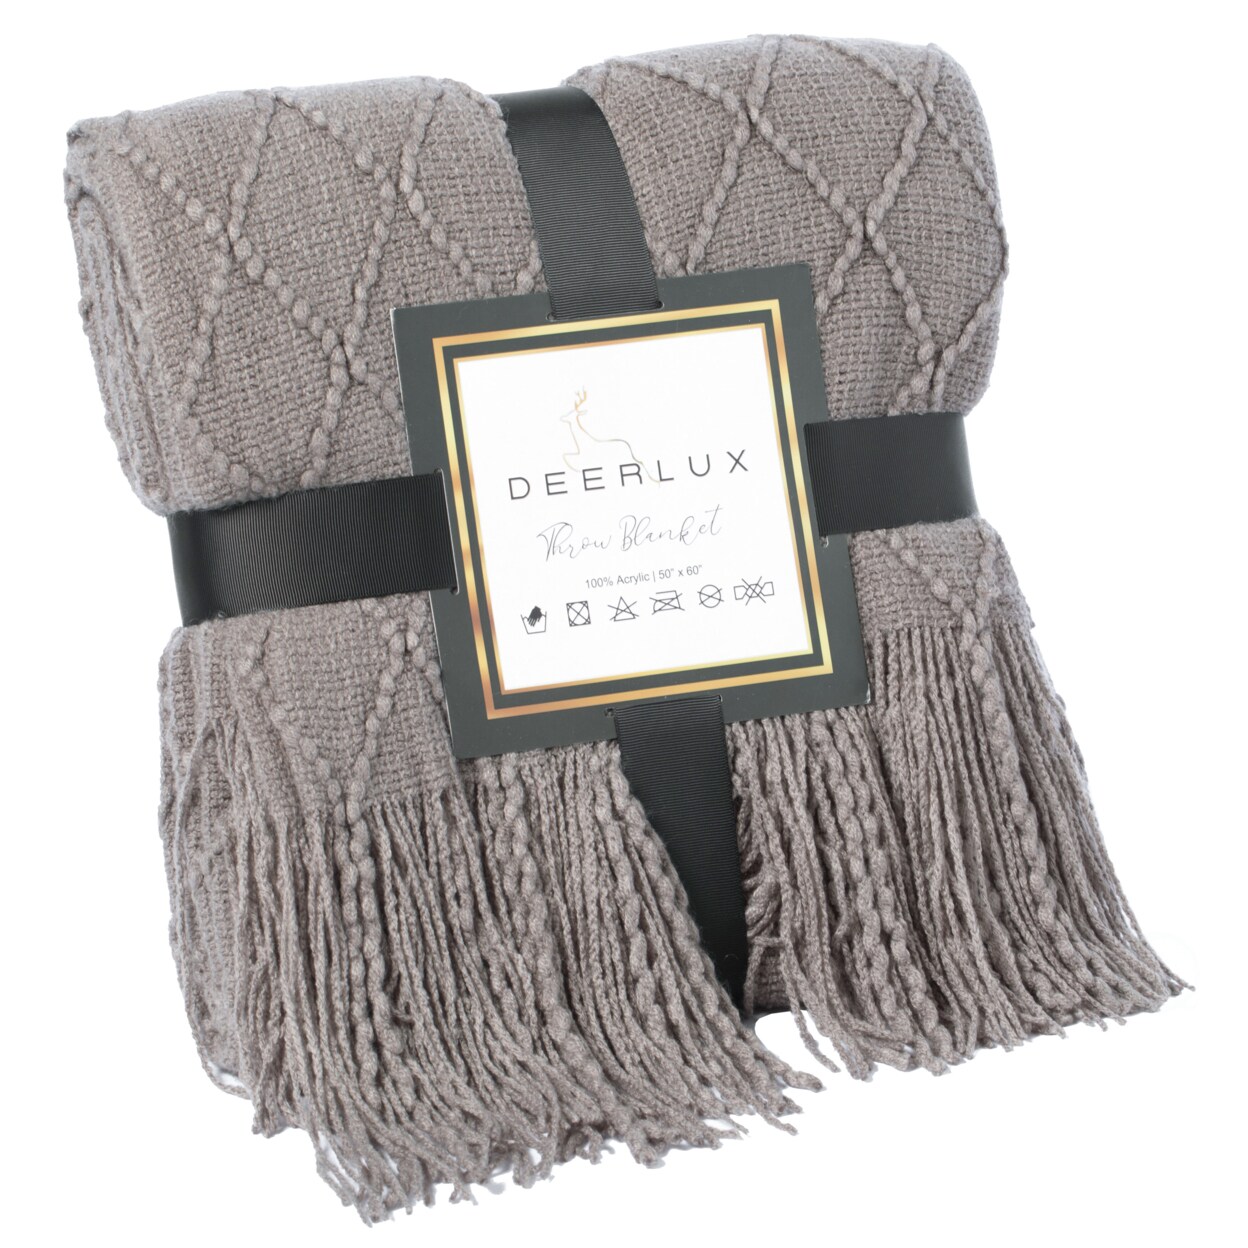 Deerlux Decorative Throw Blanket - 50x60in Soft Knit with Delightful Fringe Edges for a Sophisticated and Cozy Touch to Your